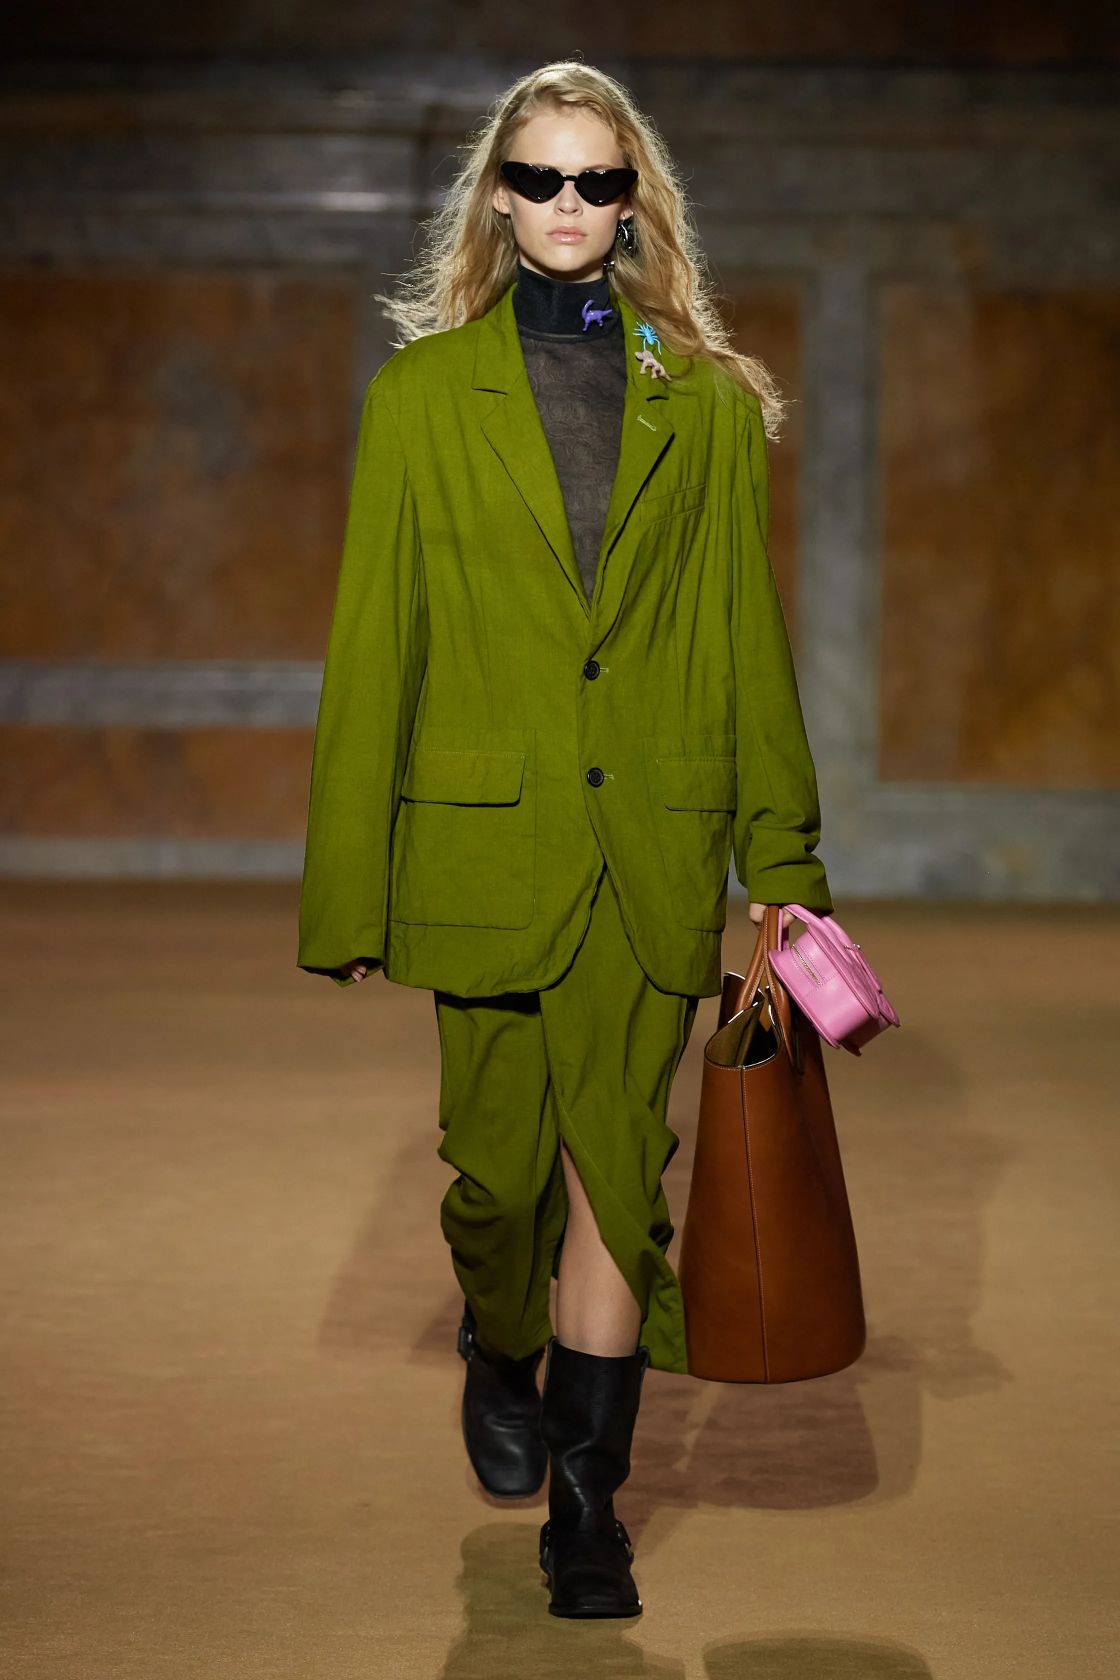 NYFW: Michael Kors Looks To The Freedom Of The 70s For SS24